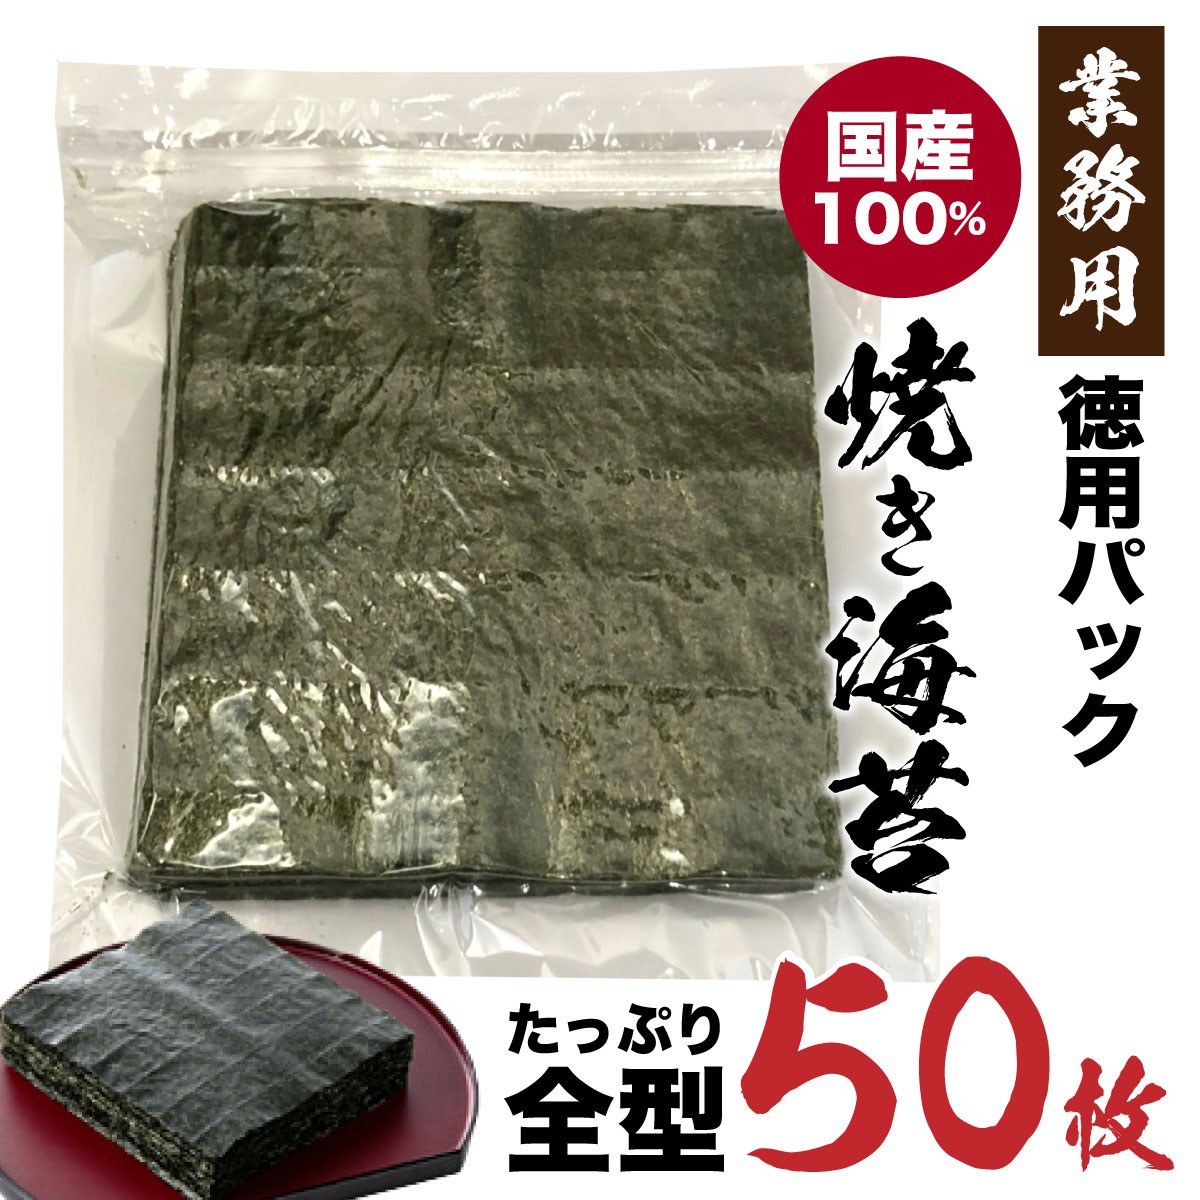  domestic production all type . seaweed high capacity 50 sheets entering Ibaraki seaweed business use home carefuly selected prejudice good quality seaweed paste board paste all shape . bargain . seaweed [ all type seaweed ] TY